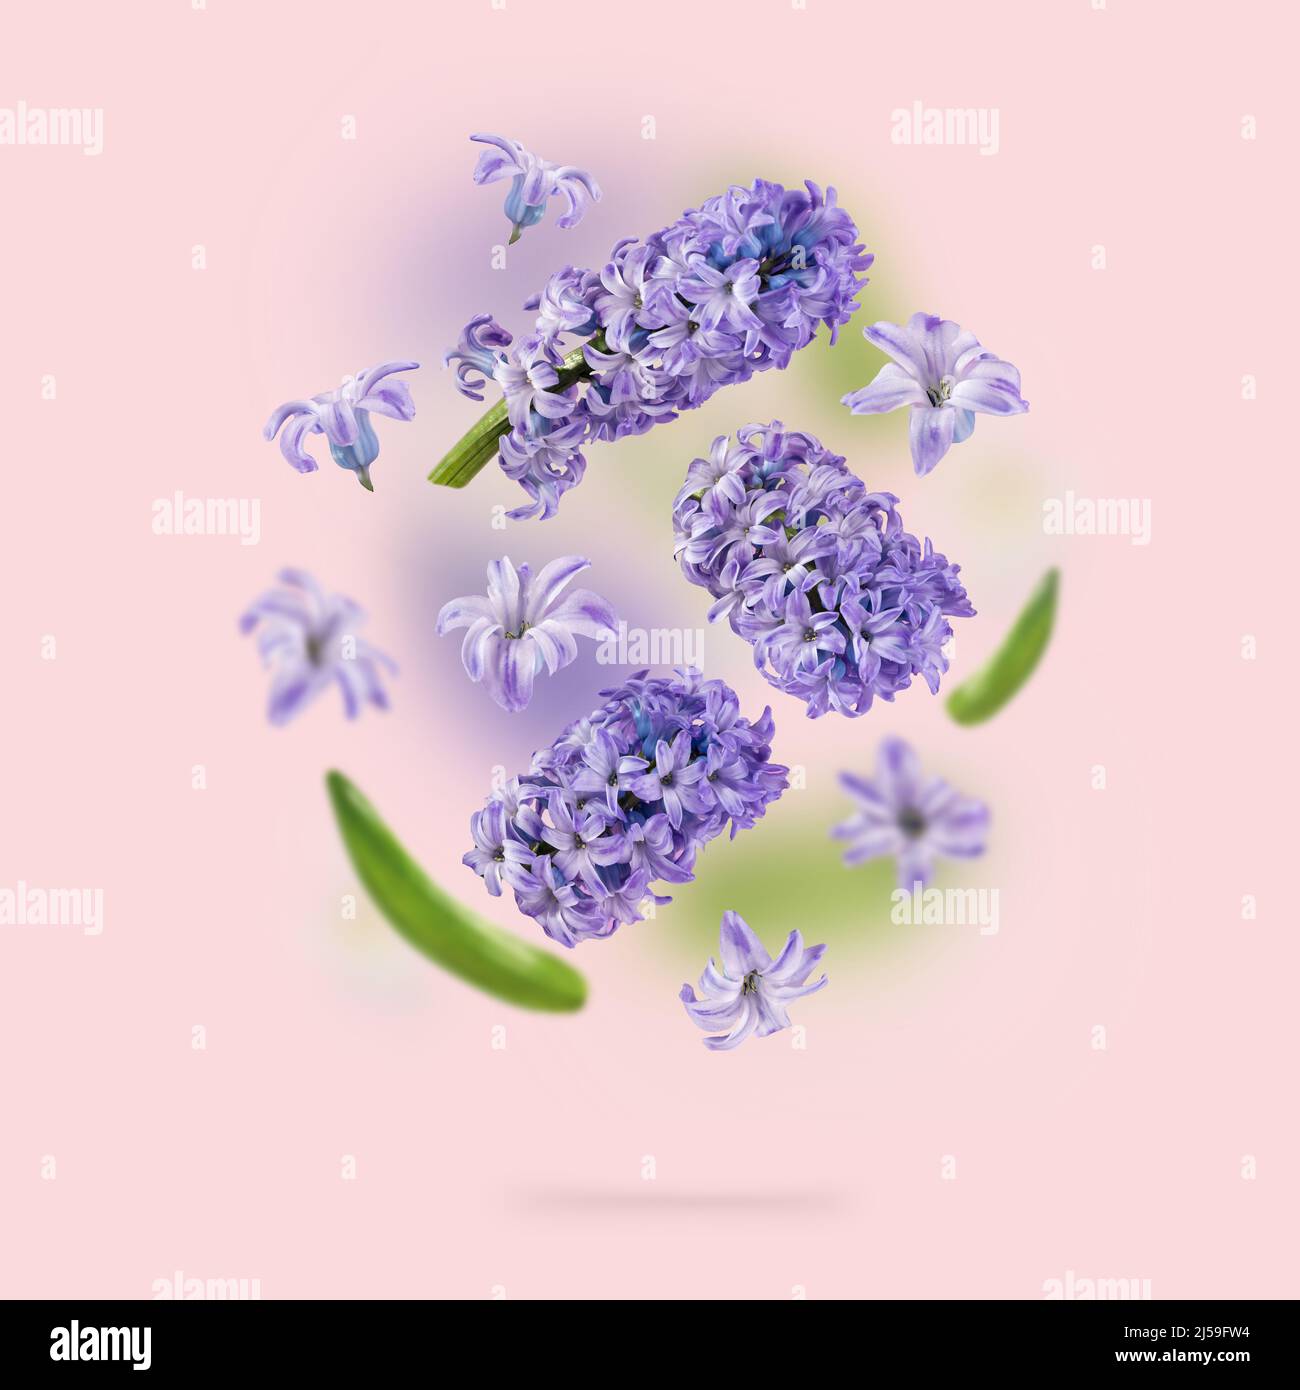 A picture with purple hyacinth flowers and green leaves flying in the air on the pink background. Levitation concept. Floating petals. Greeting card Stock Photo